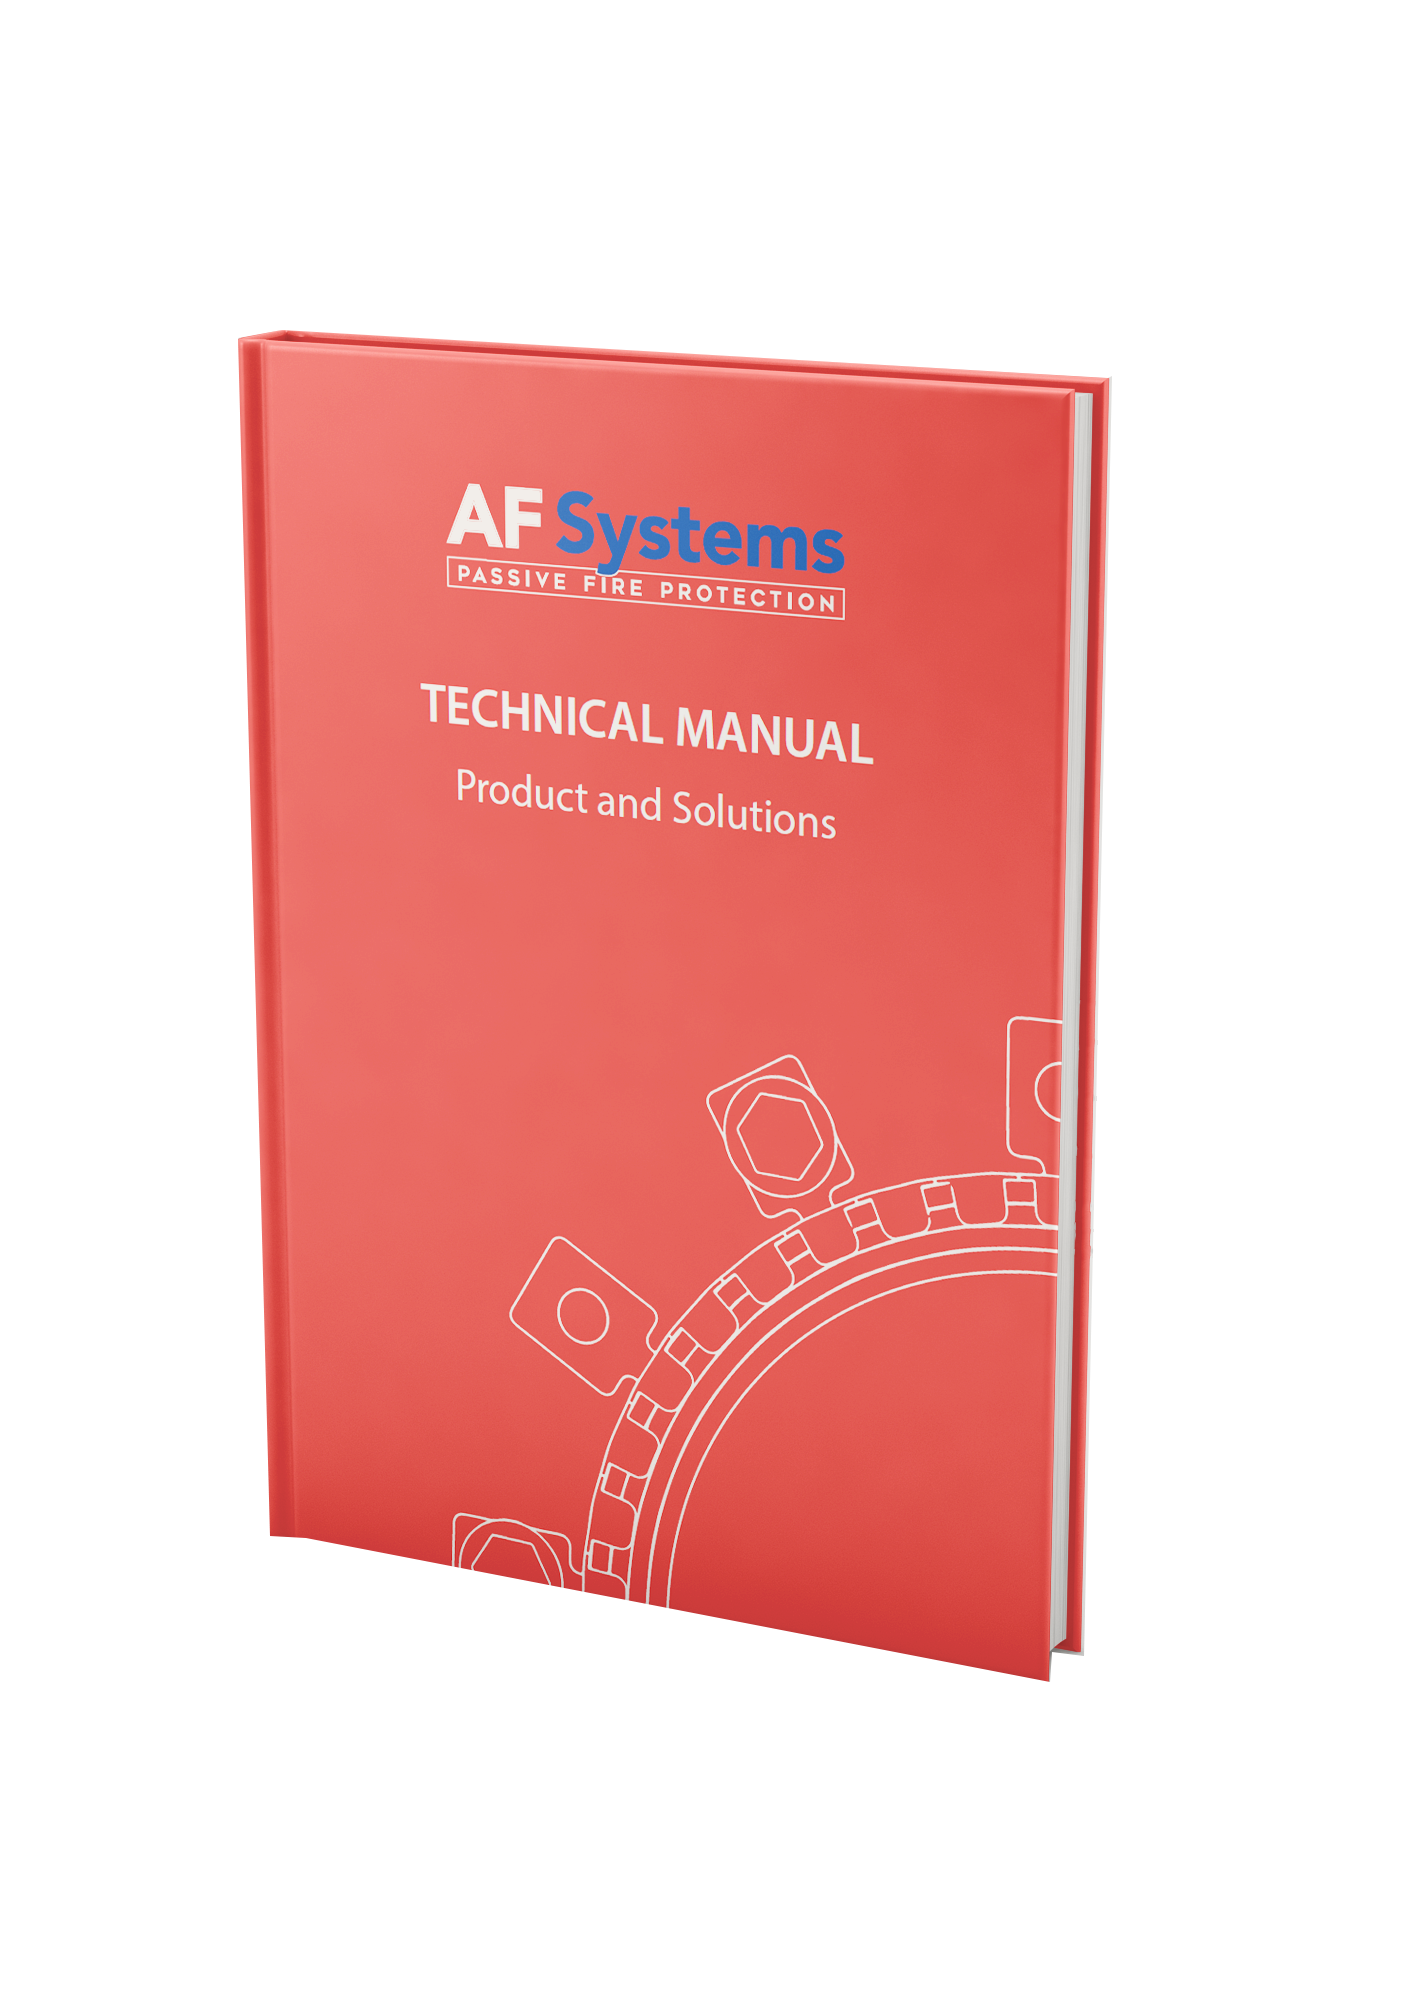 Technical Manual AF SYSTEMS